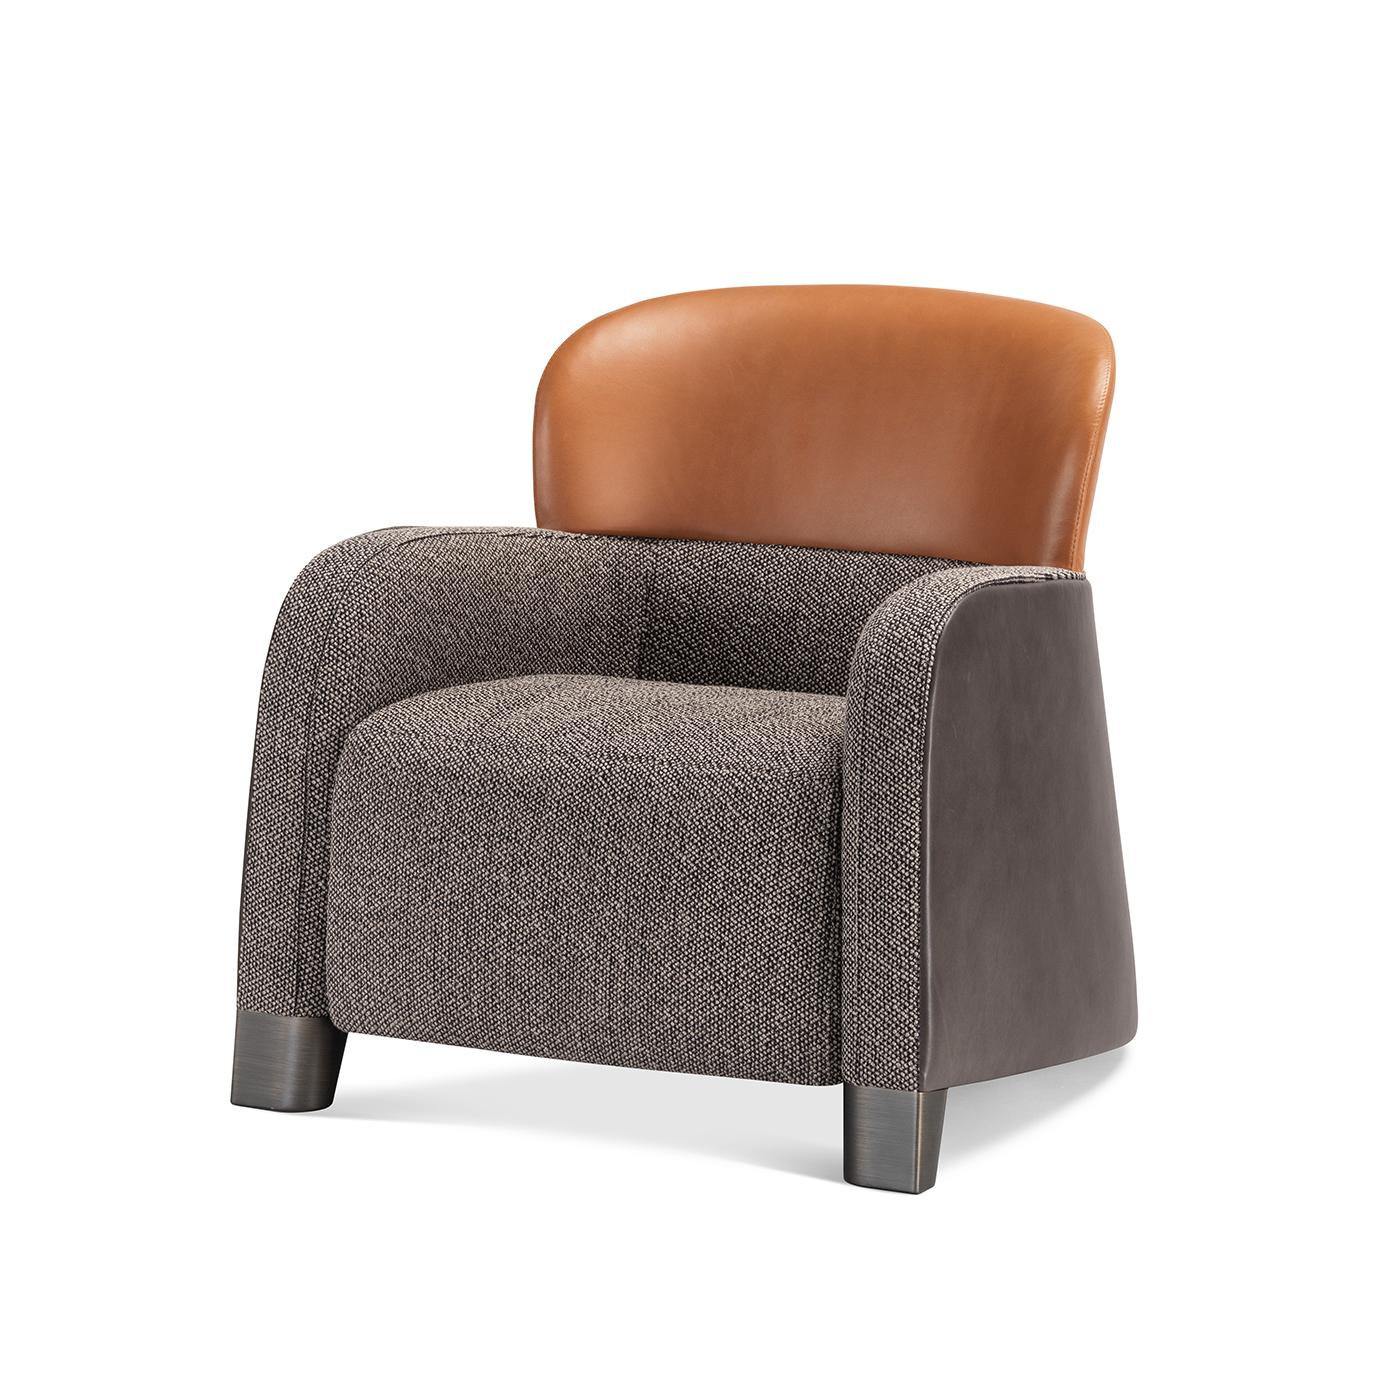 Perfect to accent a private study or a luxe, modern bedroom, this compact armchair couples an exceptional tailored quality with a clever blend of materials. The seat's cushioned shell, wrapped in gray fabric and also incorporating the straight